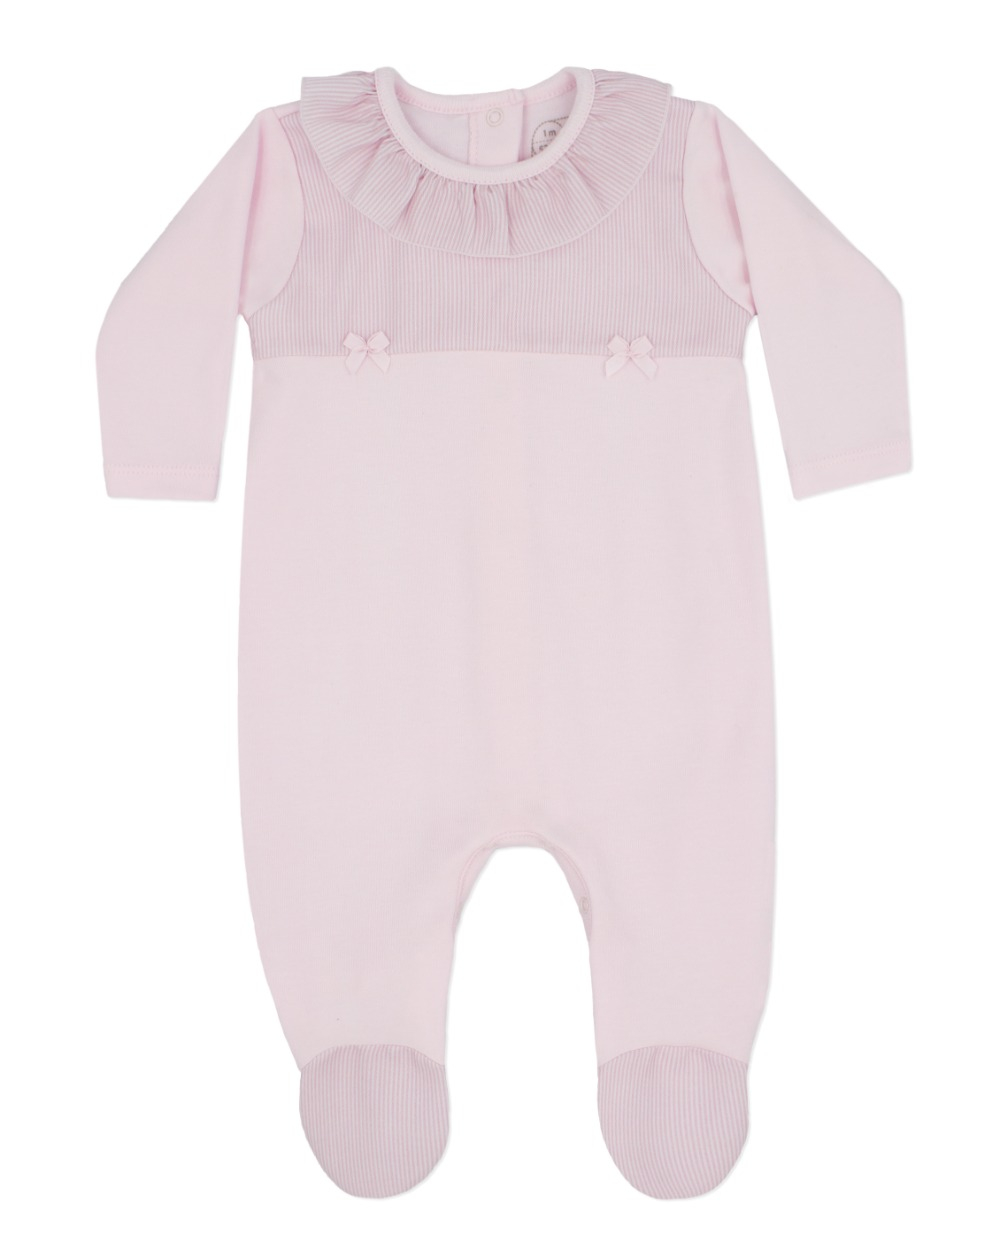 Pink striped baby bow outfit